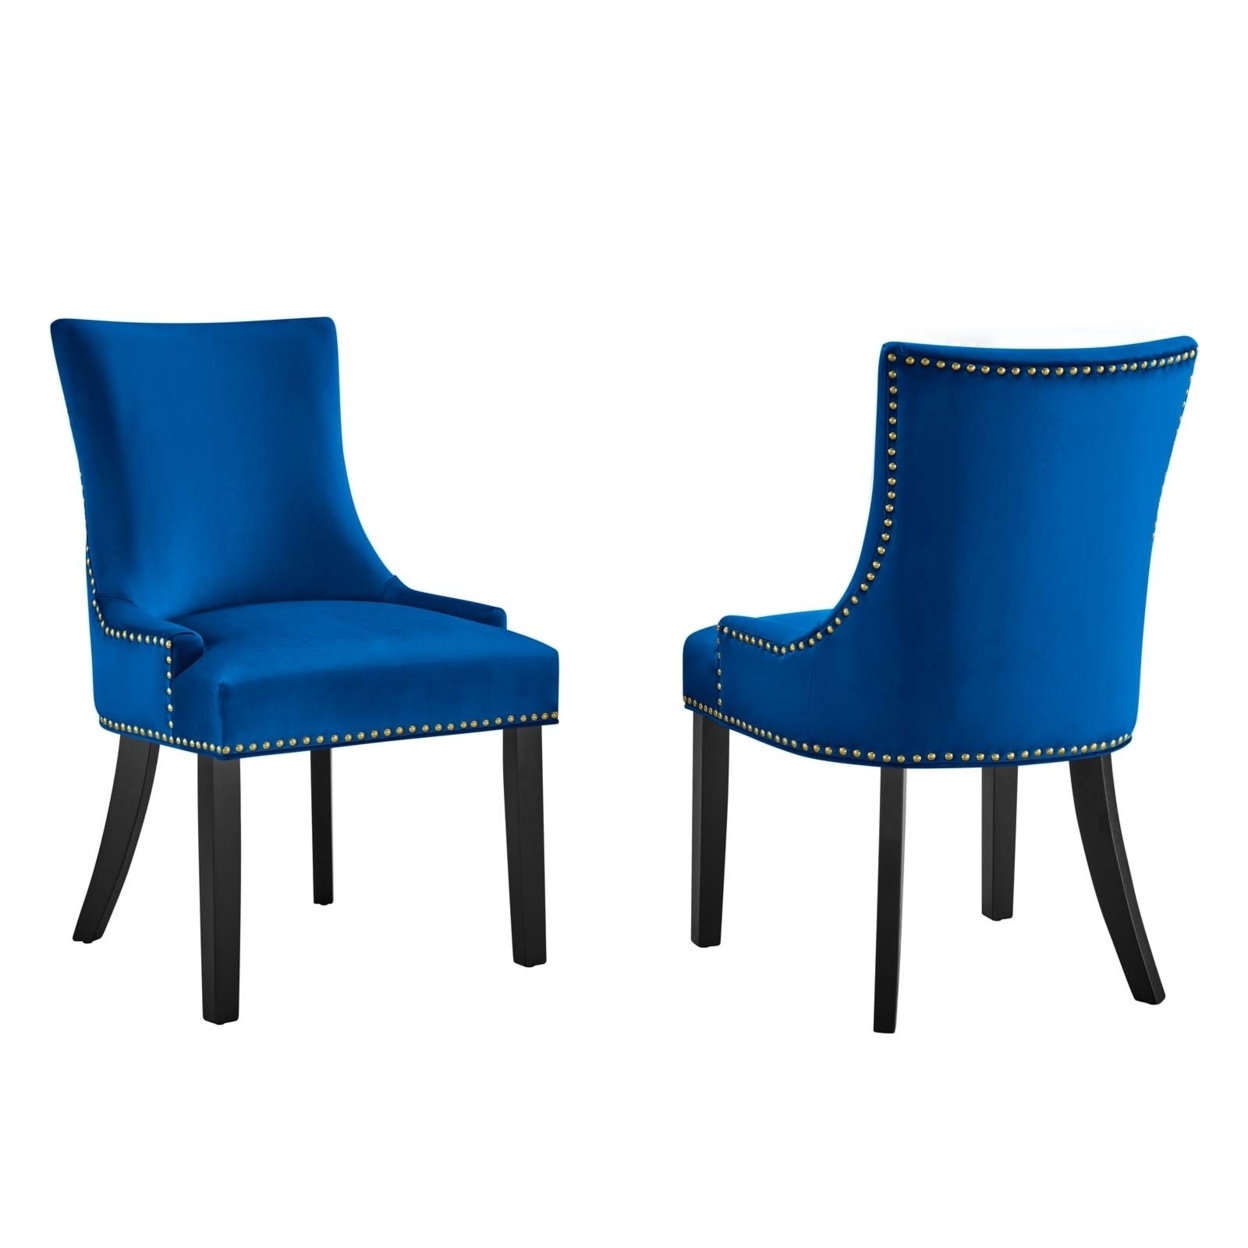 Marquis Performance Velvet Dining Chairs - Set Of 2, Navy